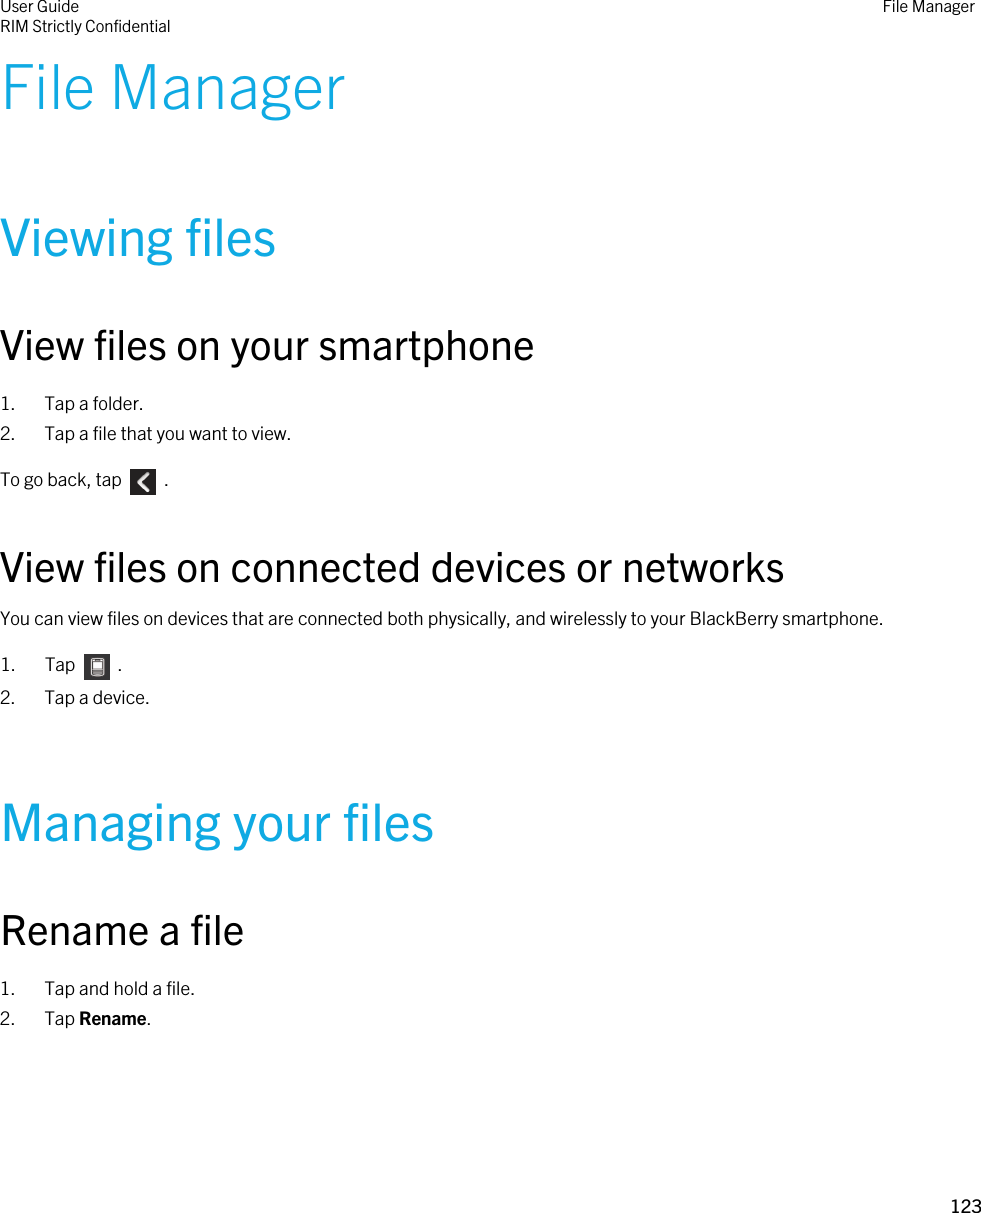 File ManagerViewing filesView files on your smartphone1. Tap a folder.2. Tap a file that you want to view.To go back, tap    .View files on connected devices or networksYou can view files on devices that are connected both physically, and wirelessly to your BlackBerry smartphone.1.  Tap    .2. Tap a device.Managing your filesRename a file1. Tap and hold a file.2. Tap Rename.User GuideRIM Strictly ConfidentialFile Manager123 